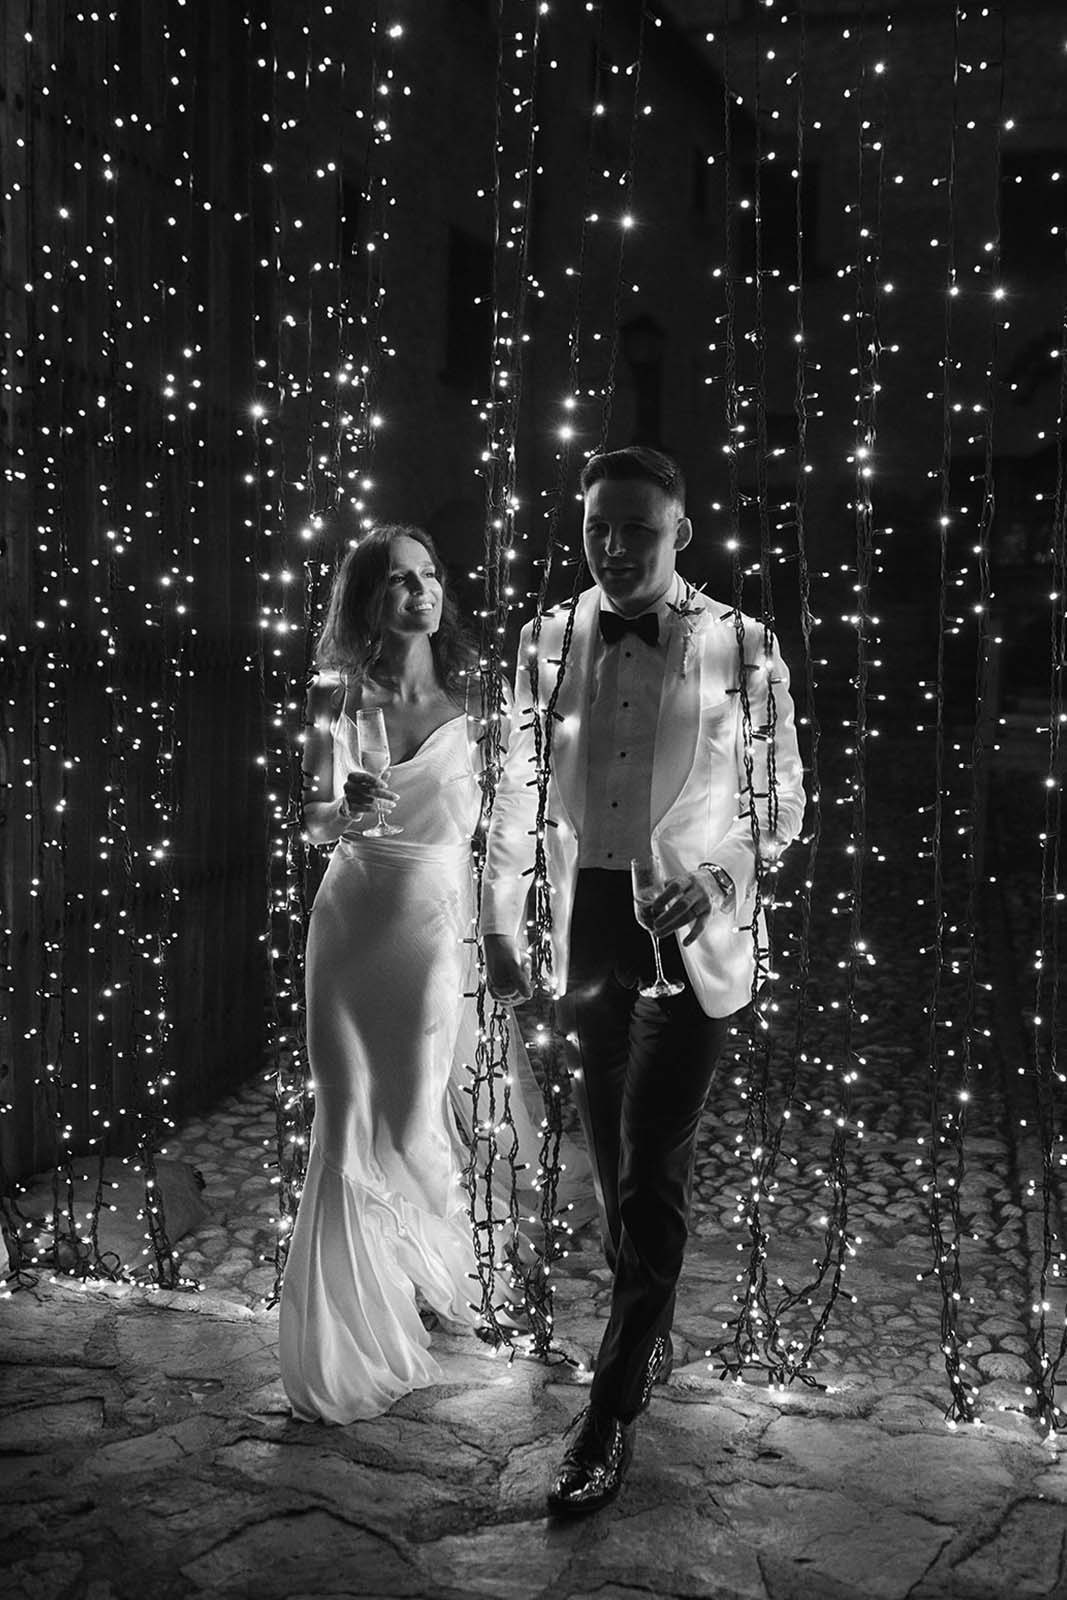 Bride and groom, surrounded by fairy lights